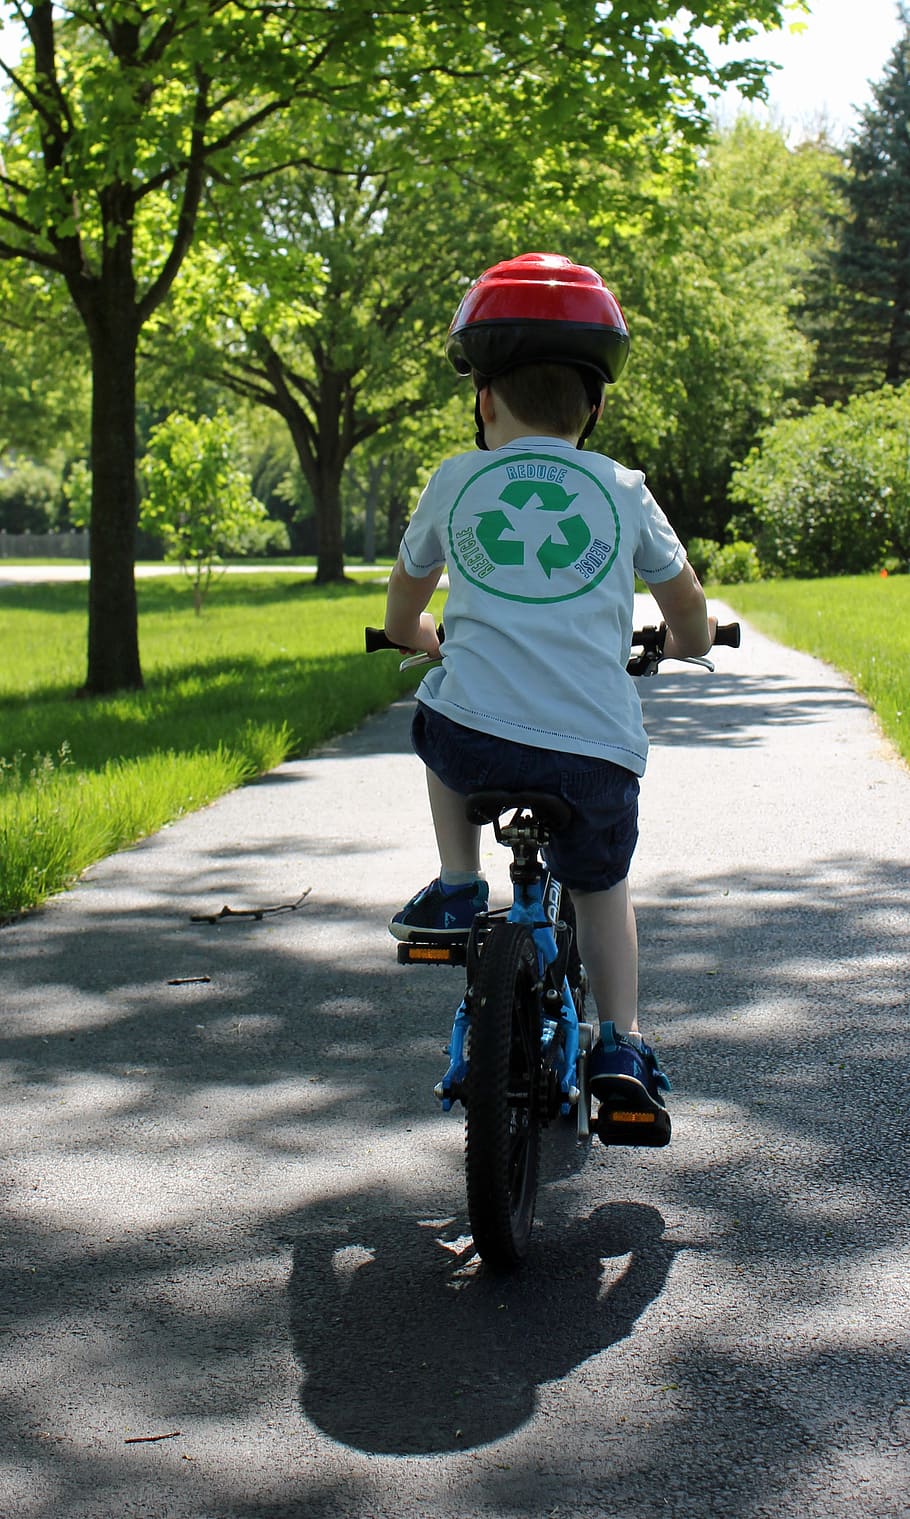 cycling, child on bike, recycle, three years old, pedal power, bike, rear view, transportation, full length, tree